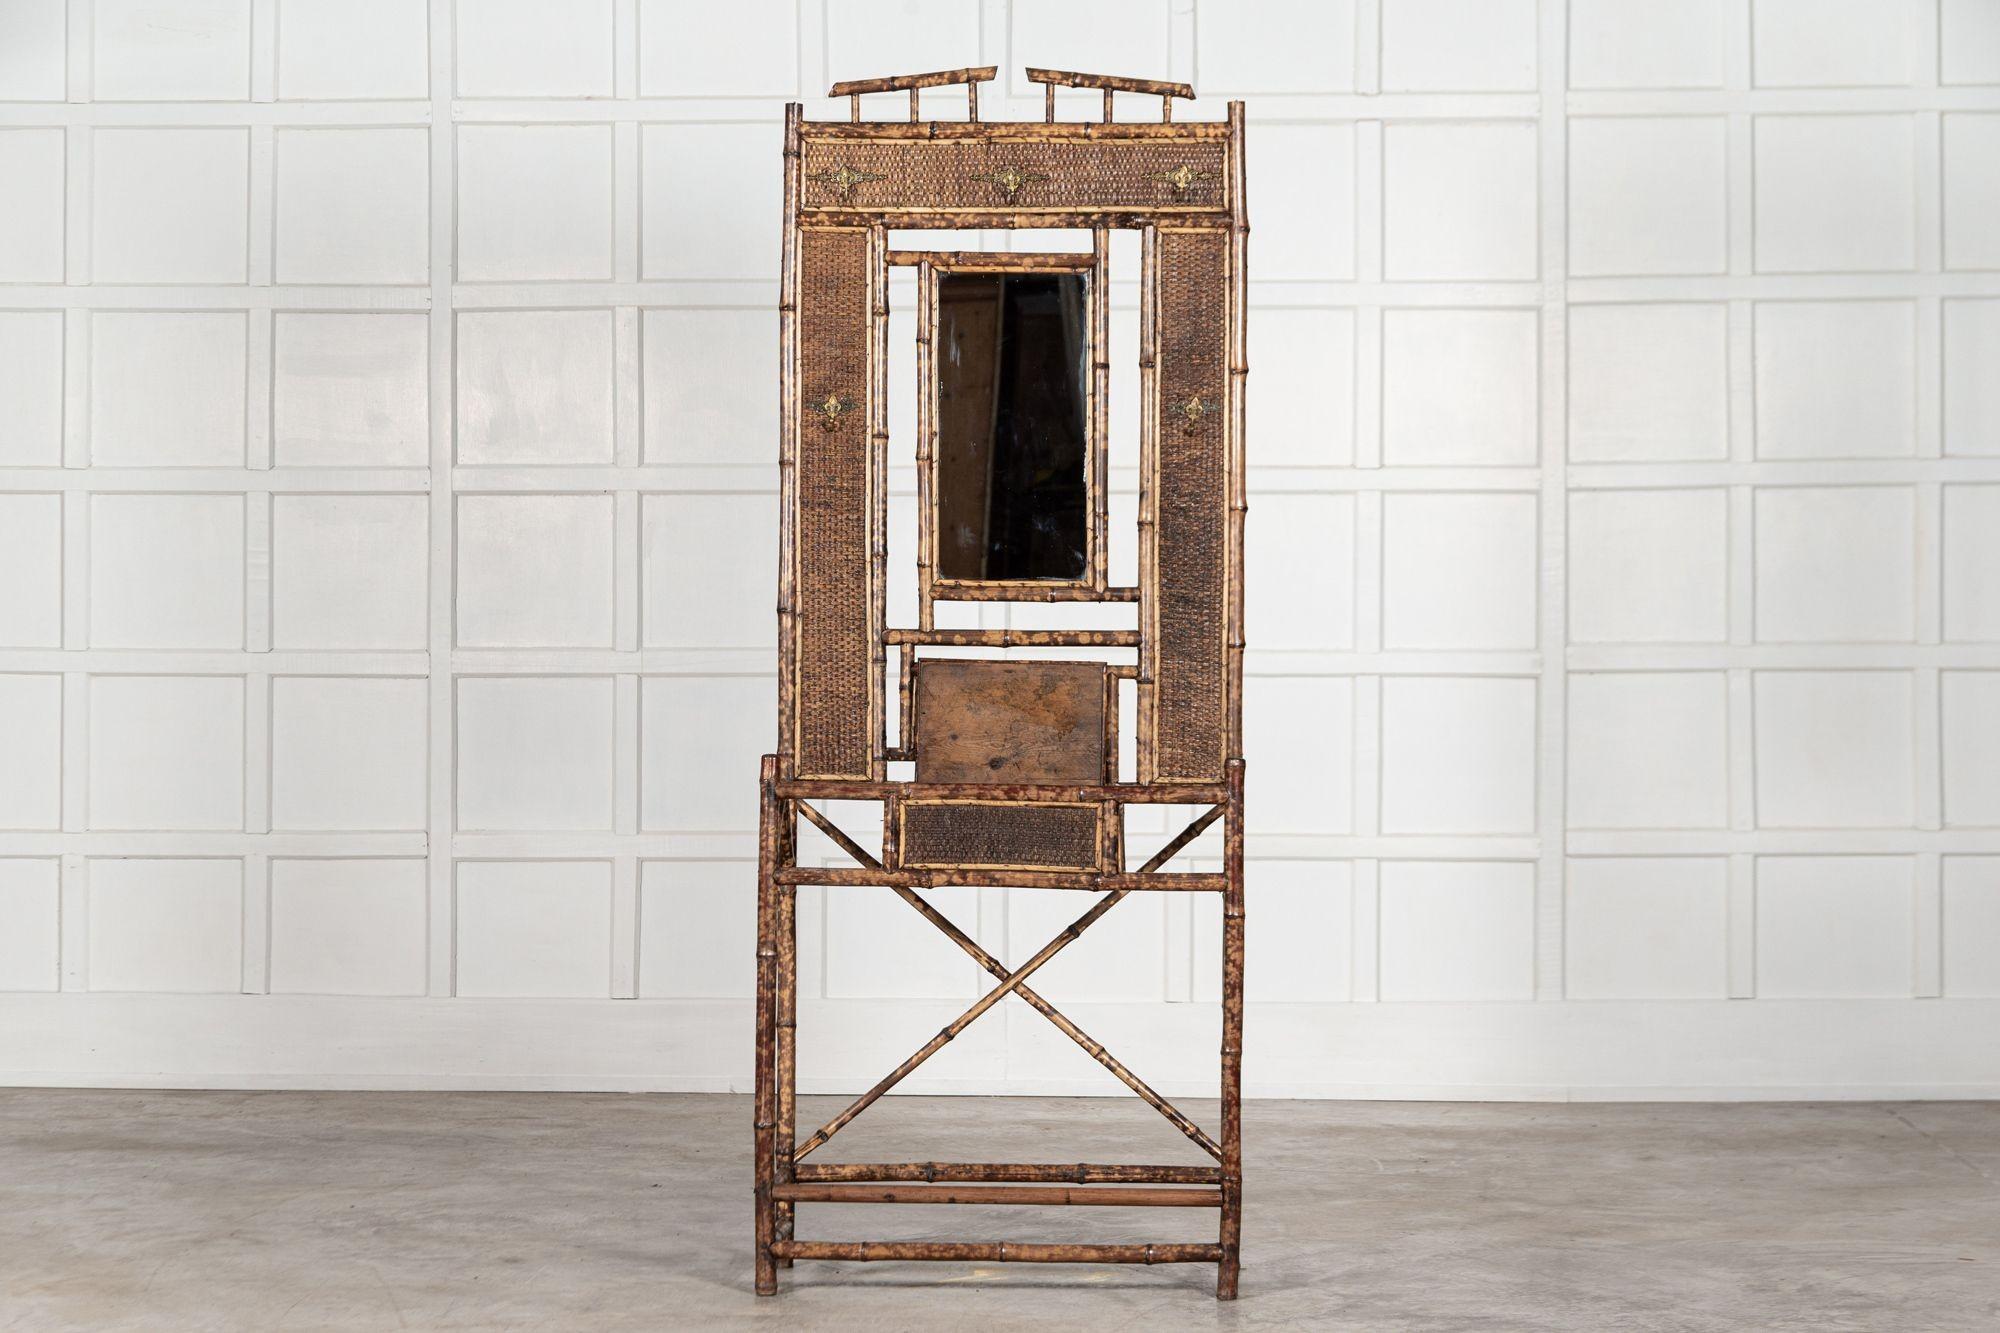 circa 1870
19th century English Bamboo mirrored hall stand
Measures: W75 x D30 x H195 cm.
   